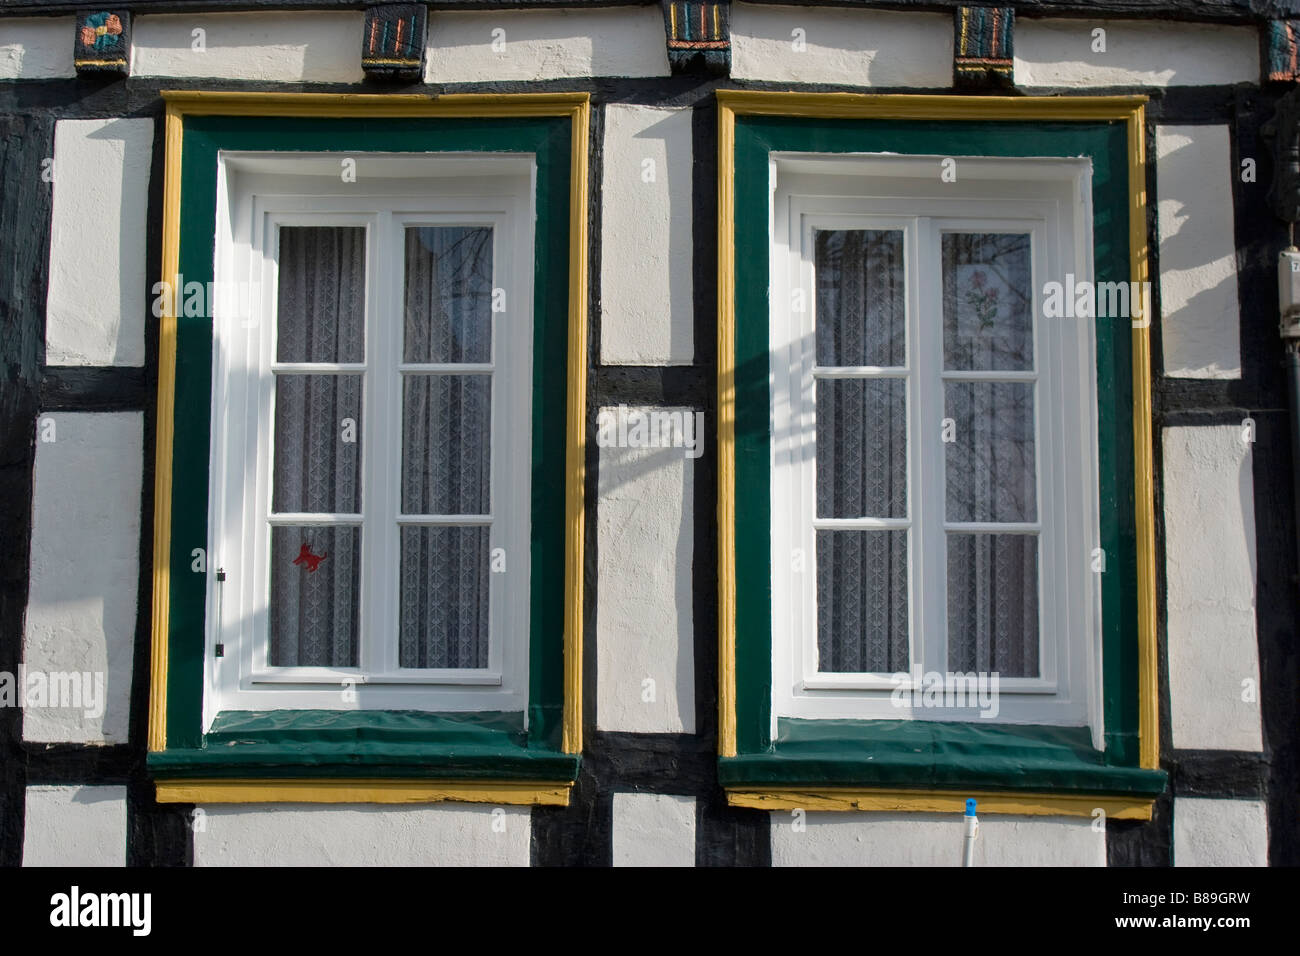 Traditional German architecture in the old town of Hattingen, Germany Stock Photo